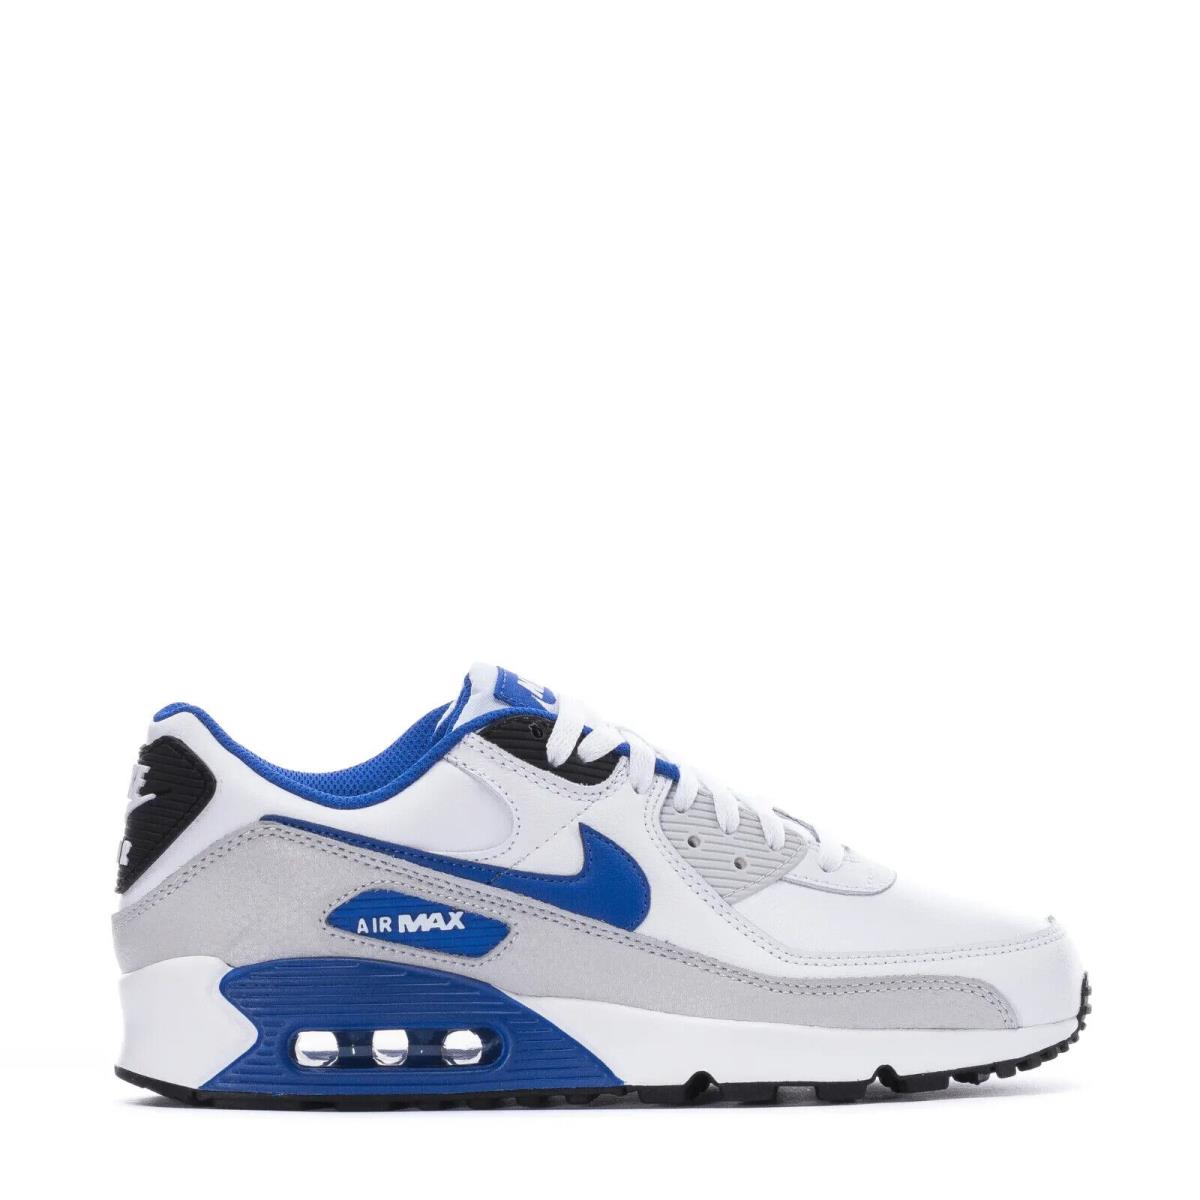 Men`s Nike Air Max 90 Swoosh Casual Shoes Blue White Grey Sneakers Athletic